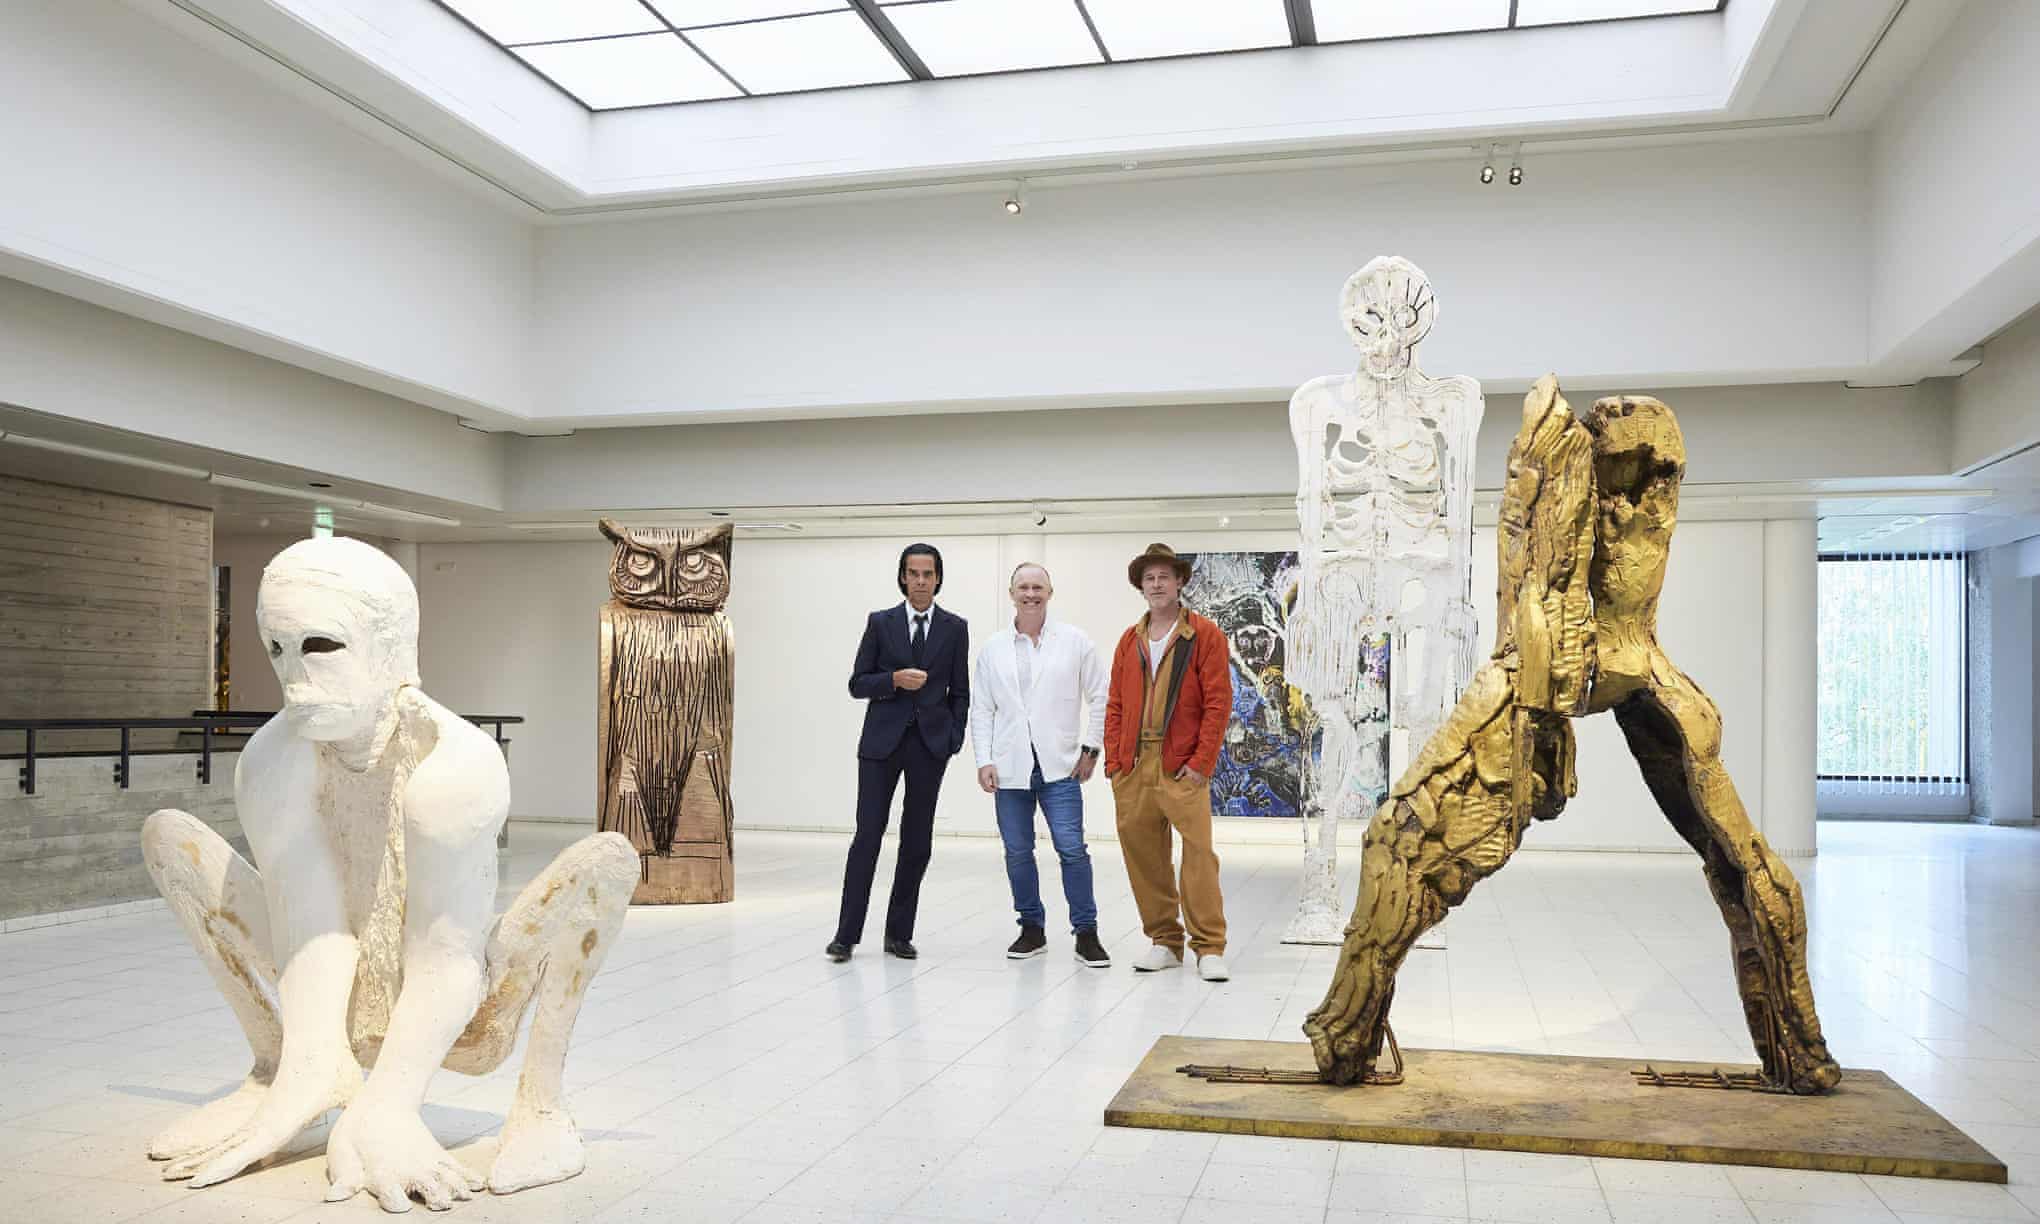 Prominent British art critic: “Brad Pitt turns out to be a very fine sculptor” (theguardian.com)